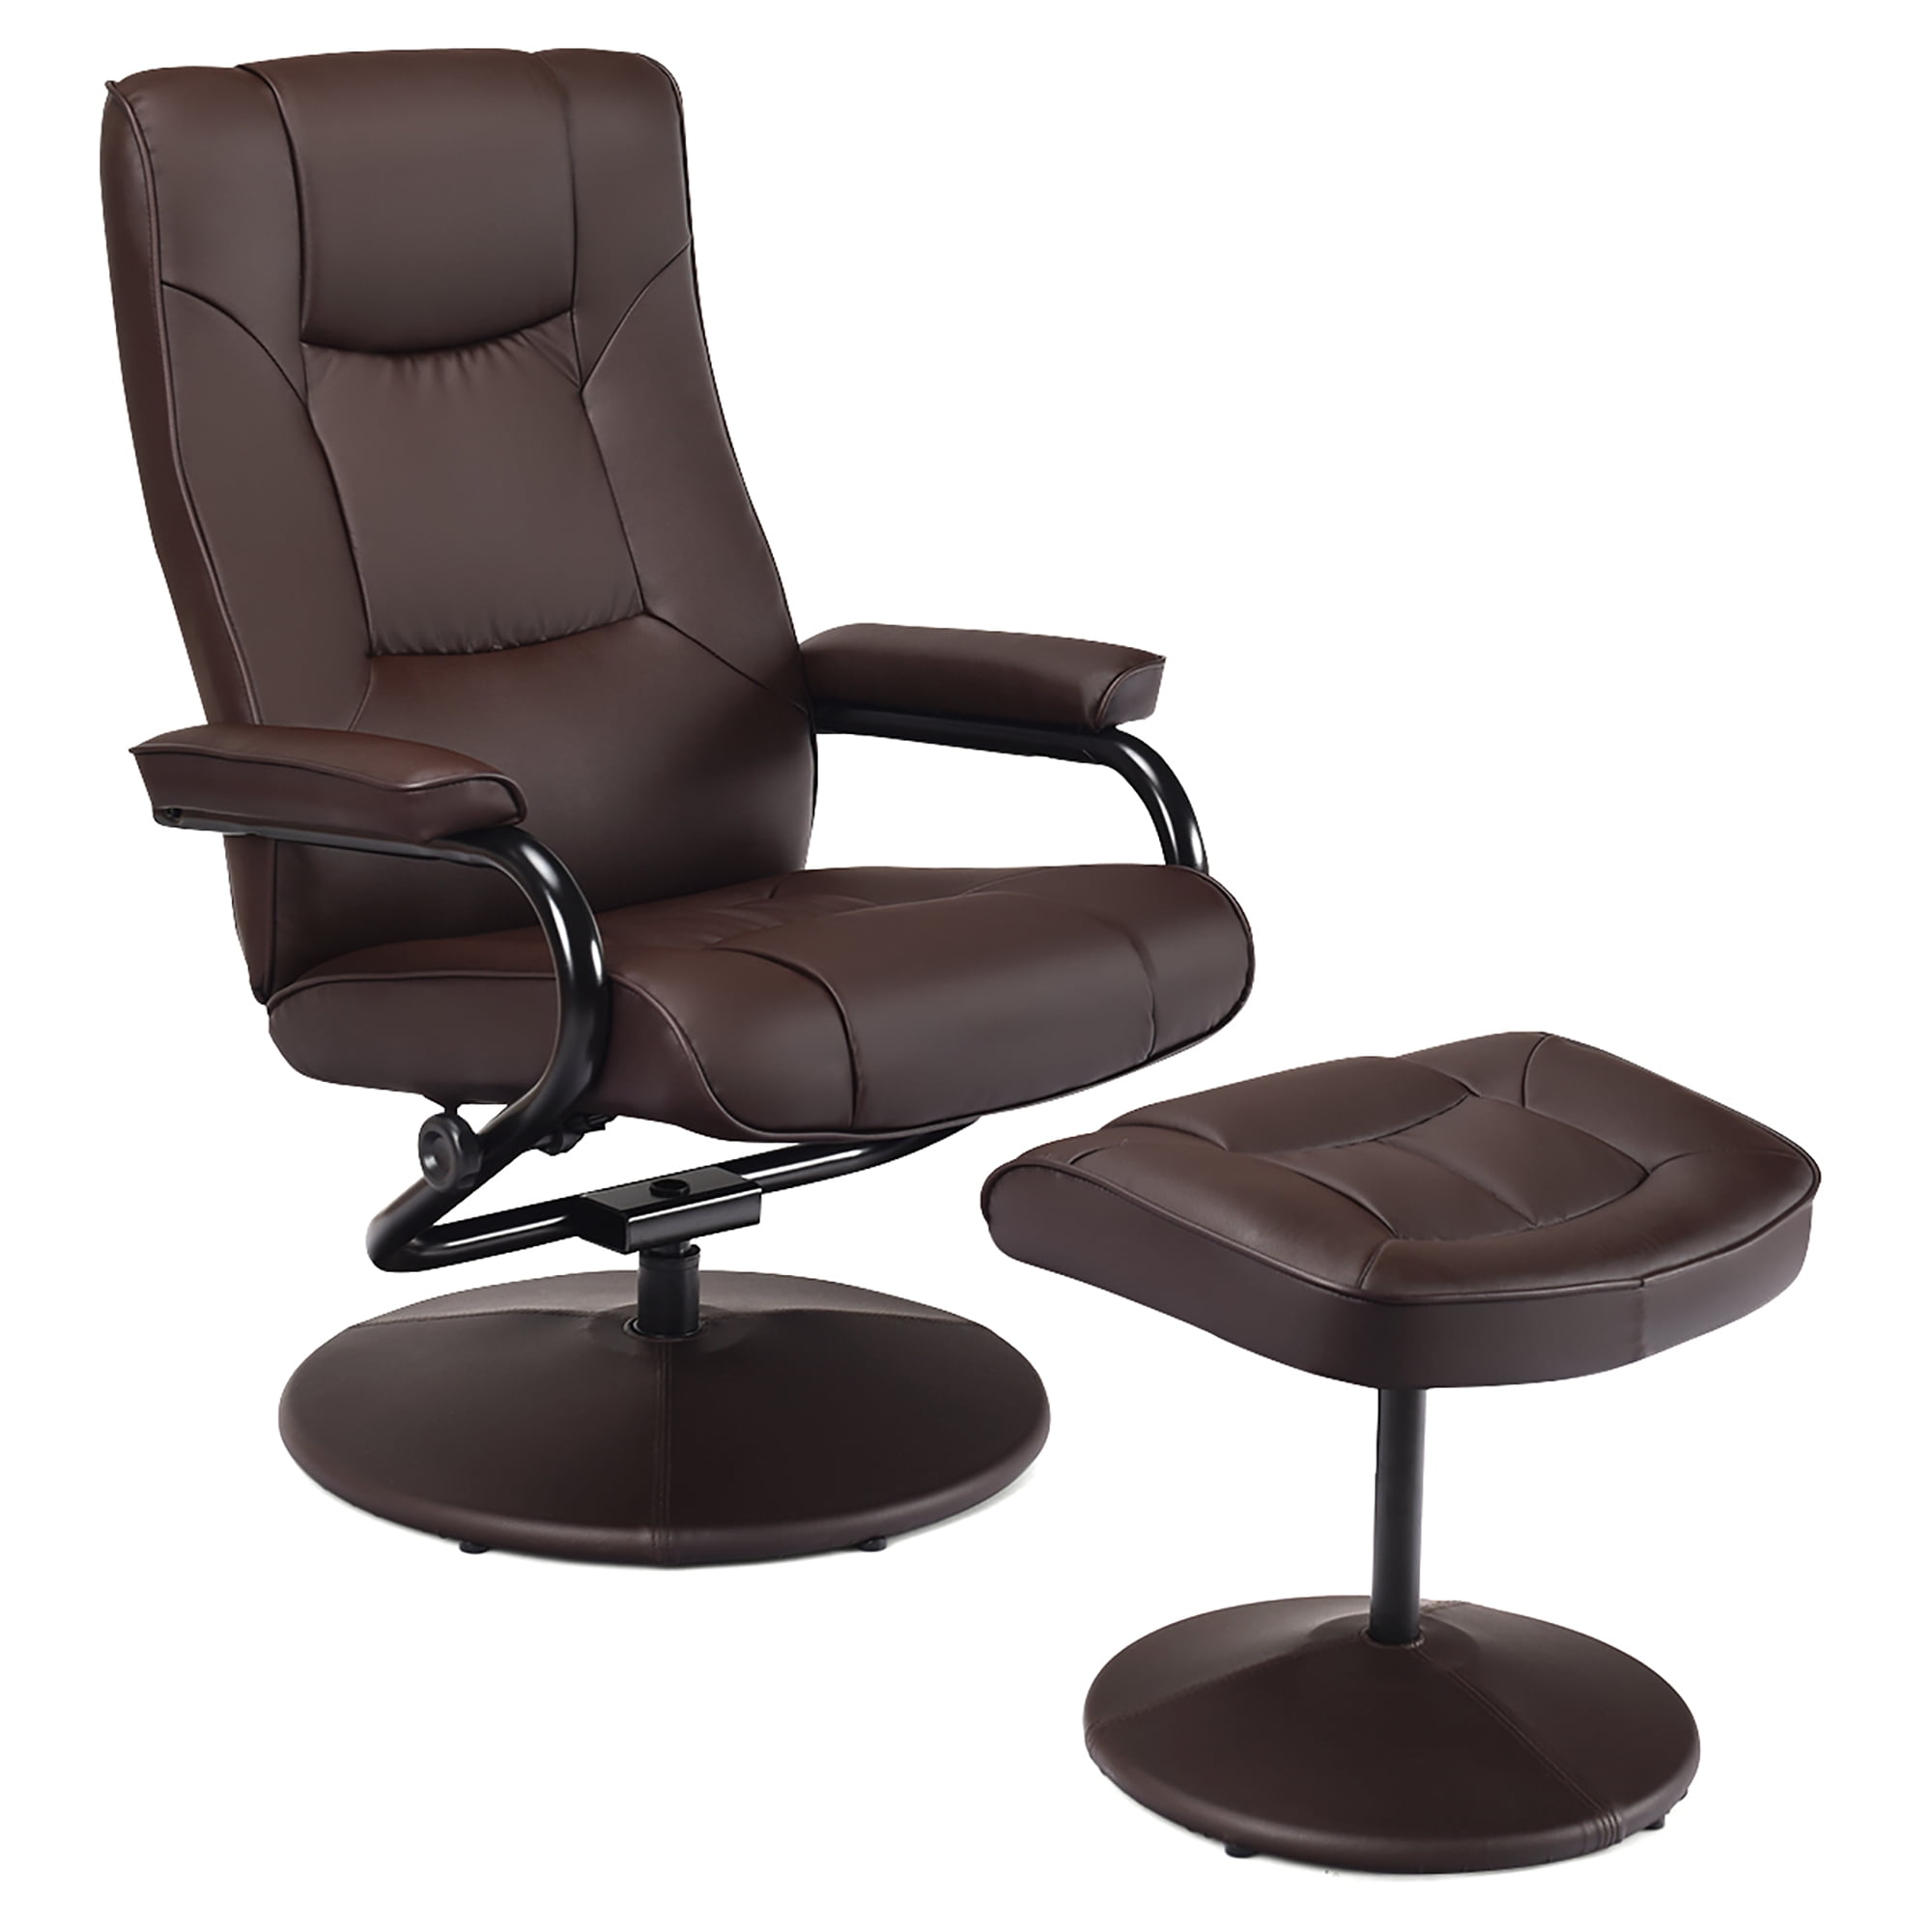 Swivel Recliner PU Leather Armchair Executive Office Chair Lounger Sofa w/Stool 